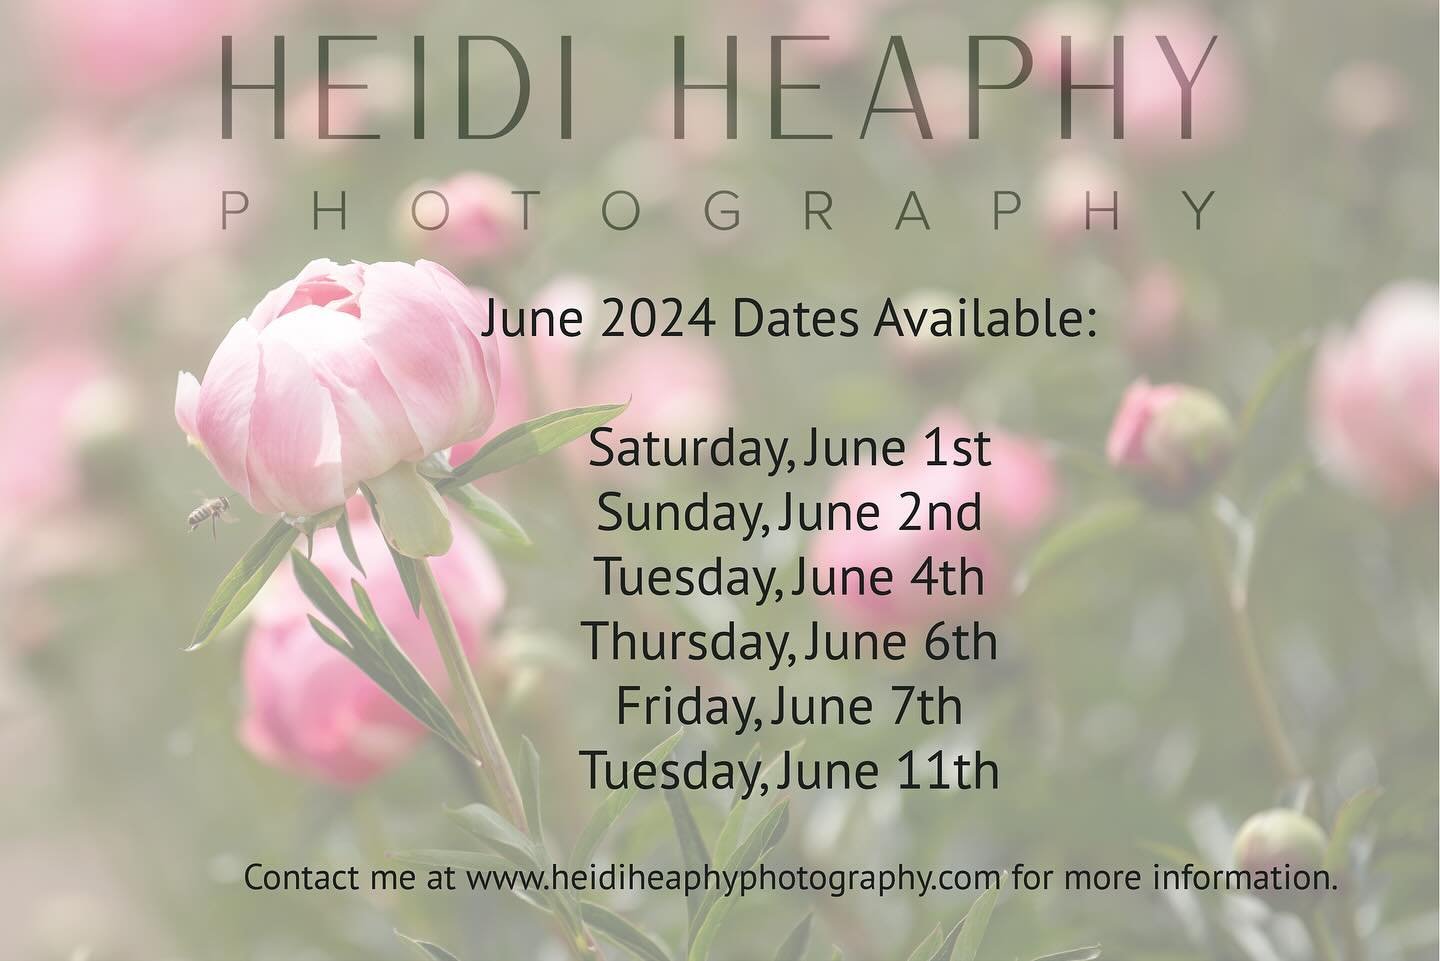 June will be here soon and my June availability is limited to these dates. Contact me to book June, July, or August soon!